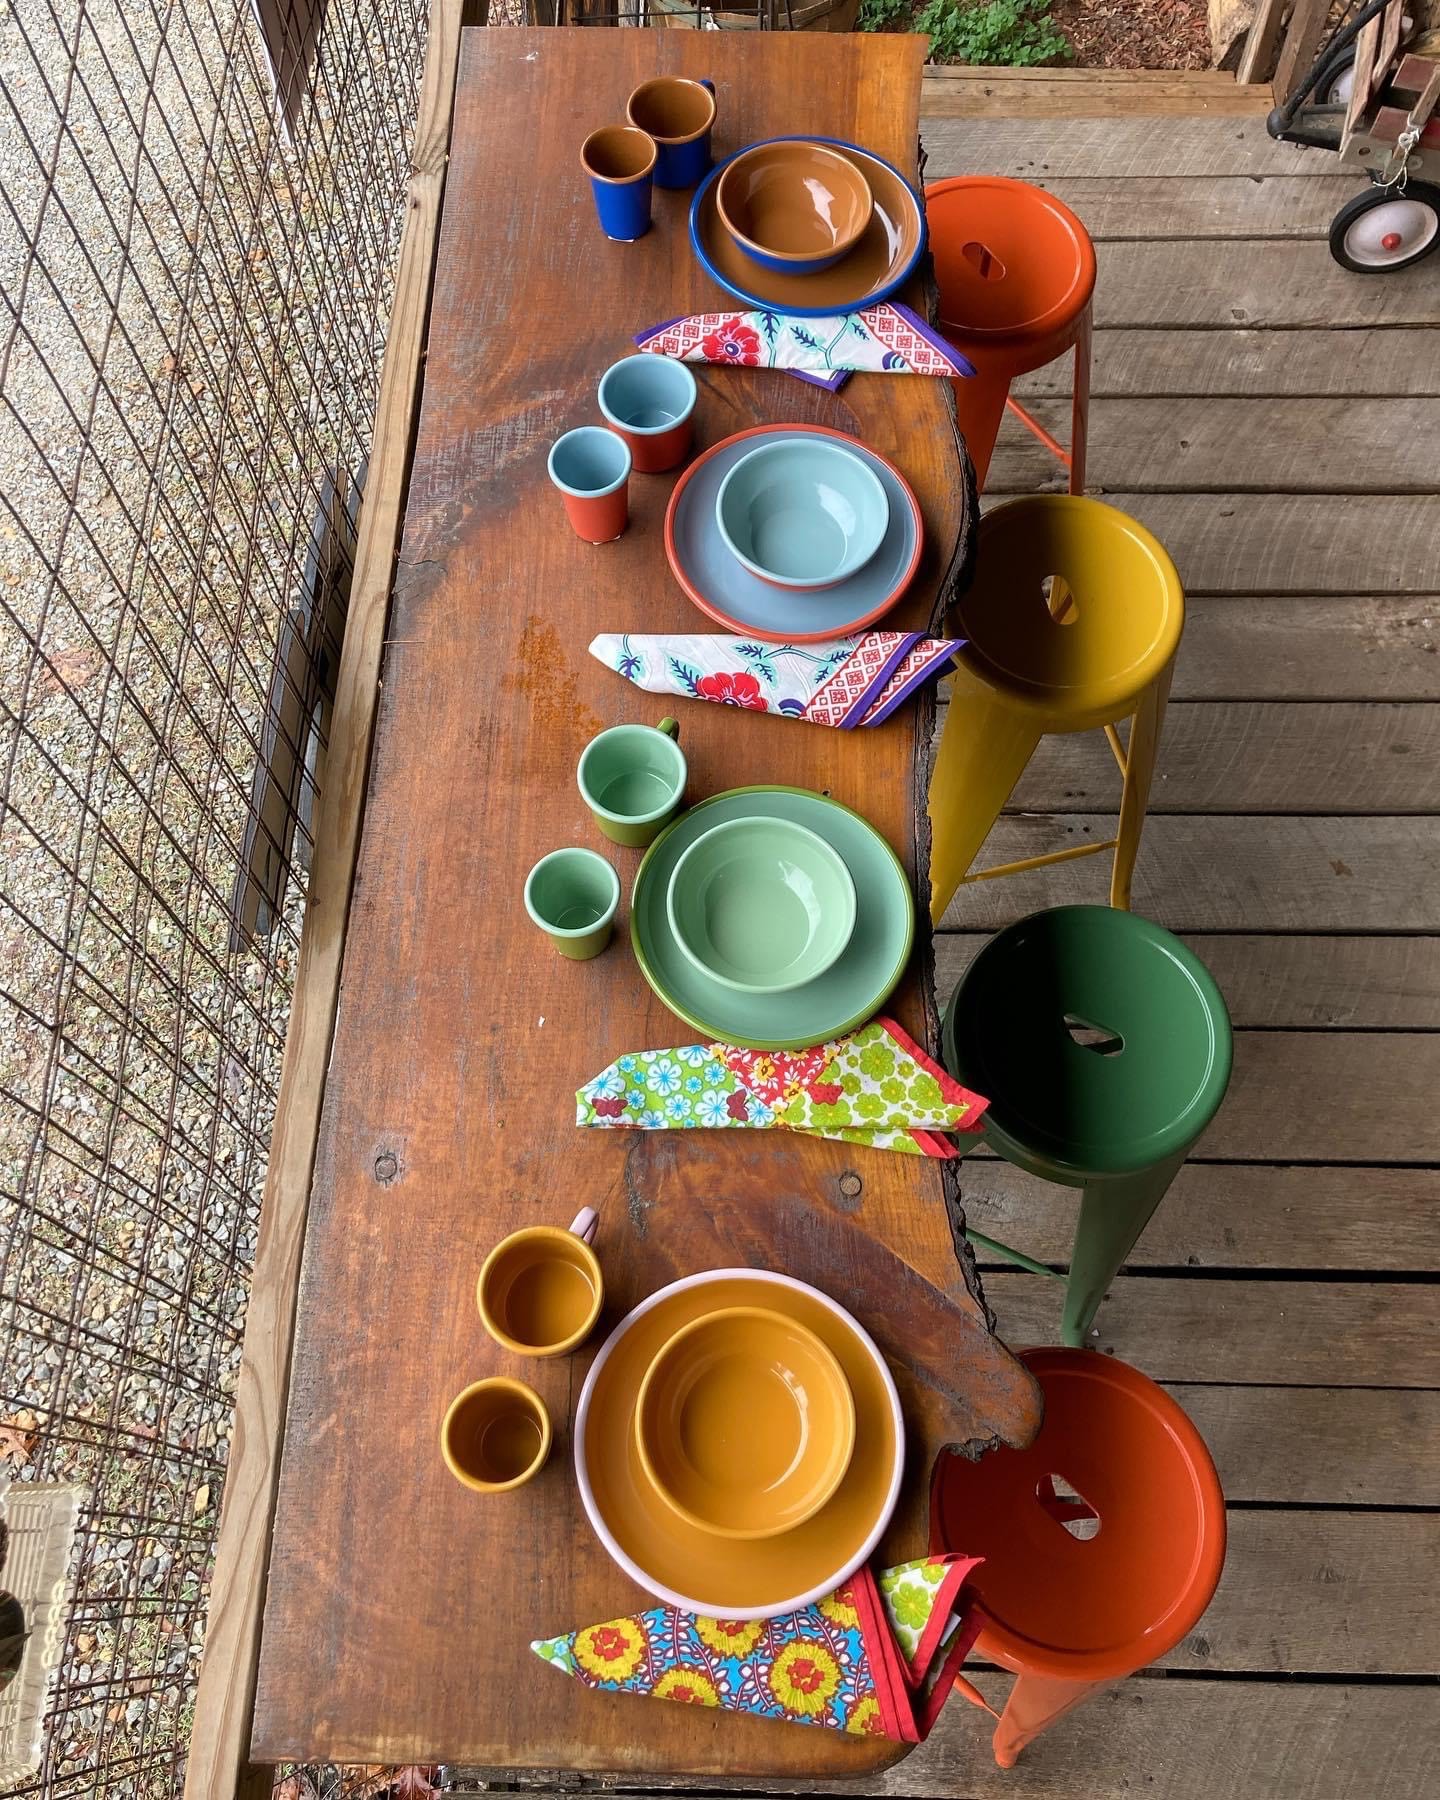 https://tallulahpoint.net/wp-content/uploads/2022/04/colorful-table-setting.jpeg